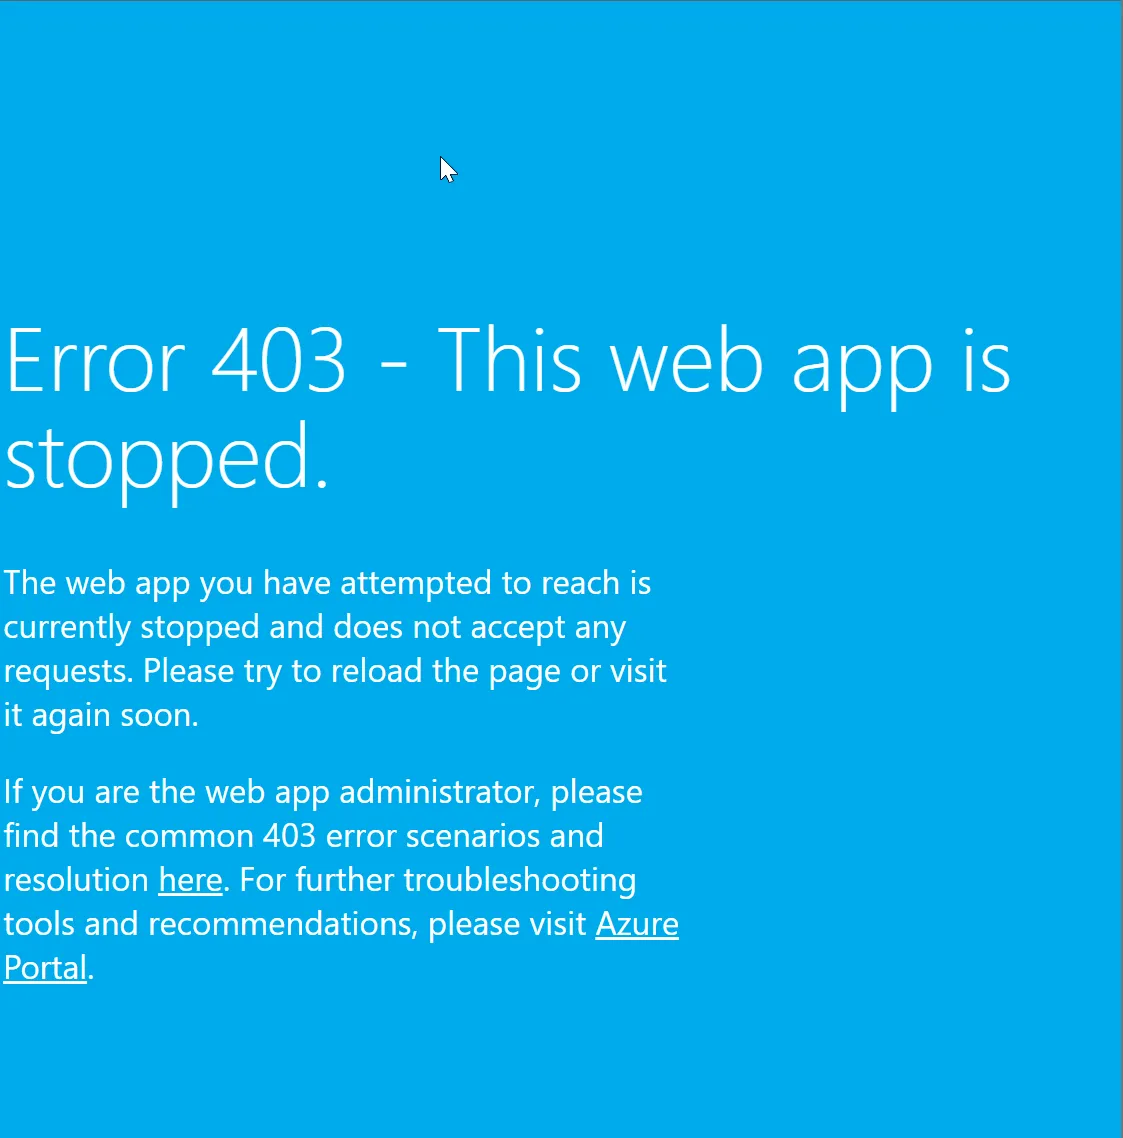 Web app is stopped